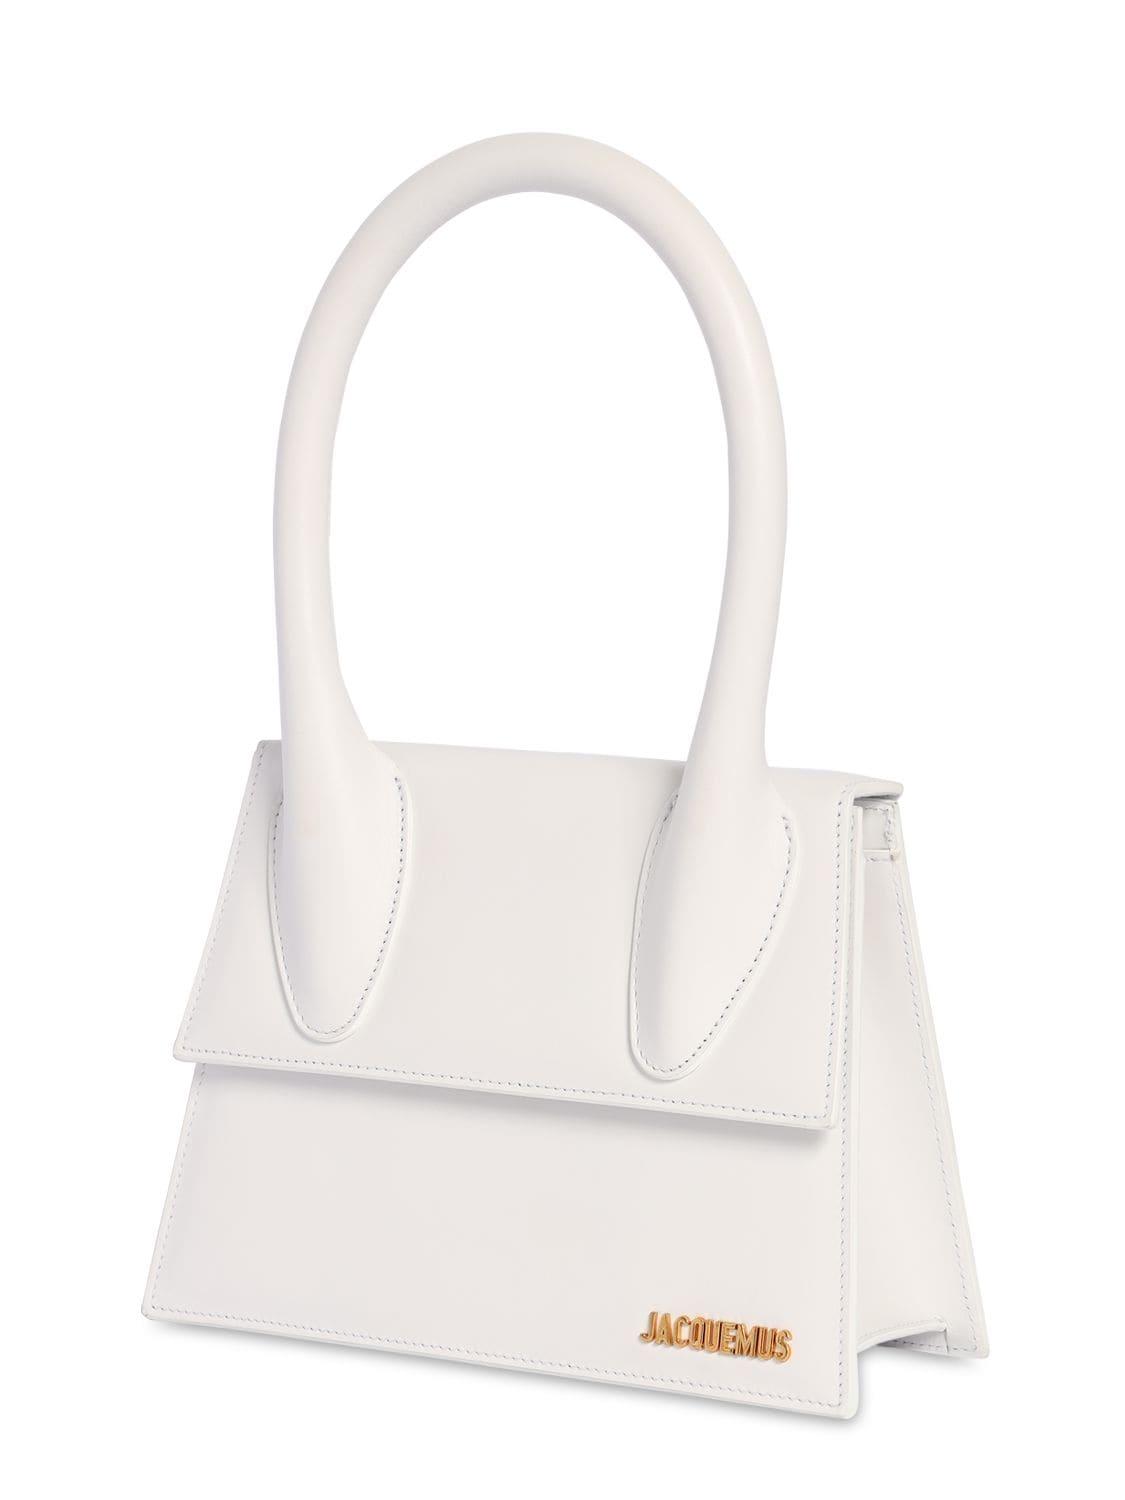 Jacquemus Le Grand Chiquito Leather Top Handle Bag in White | Lyst UK